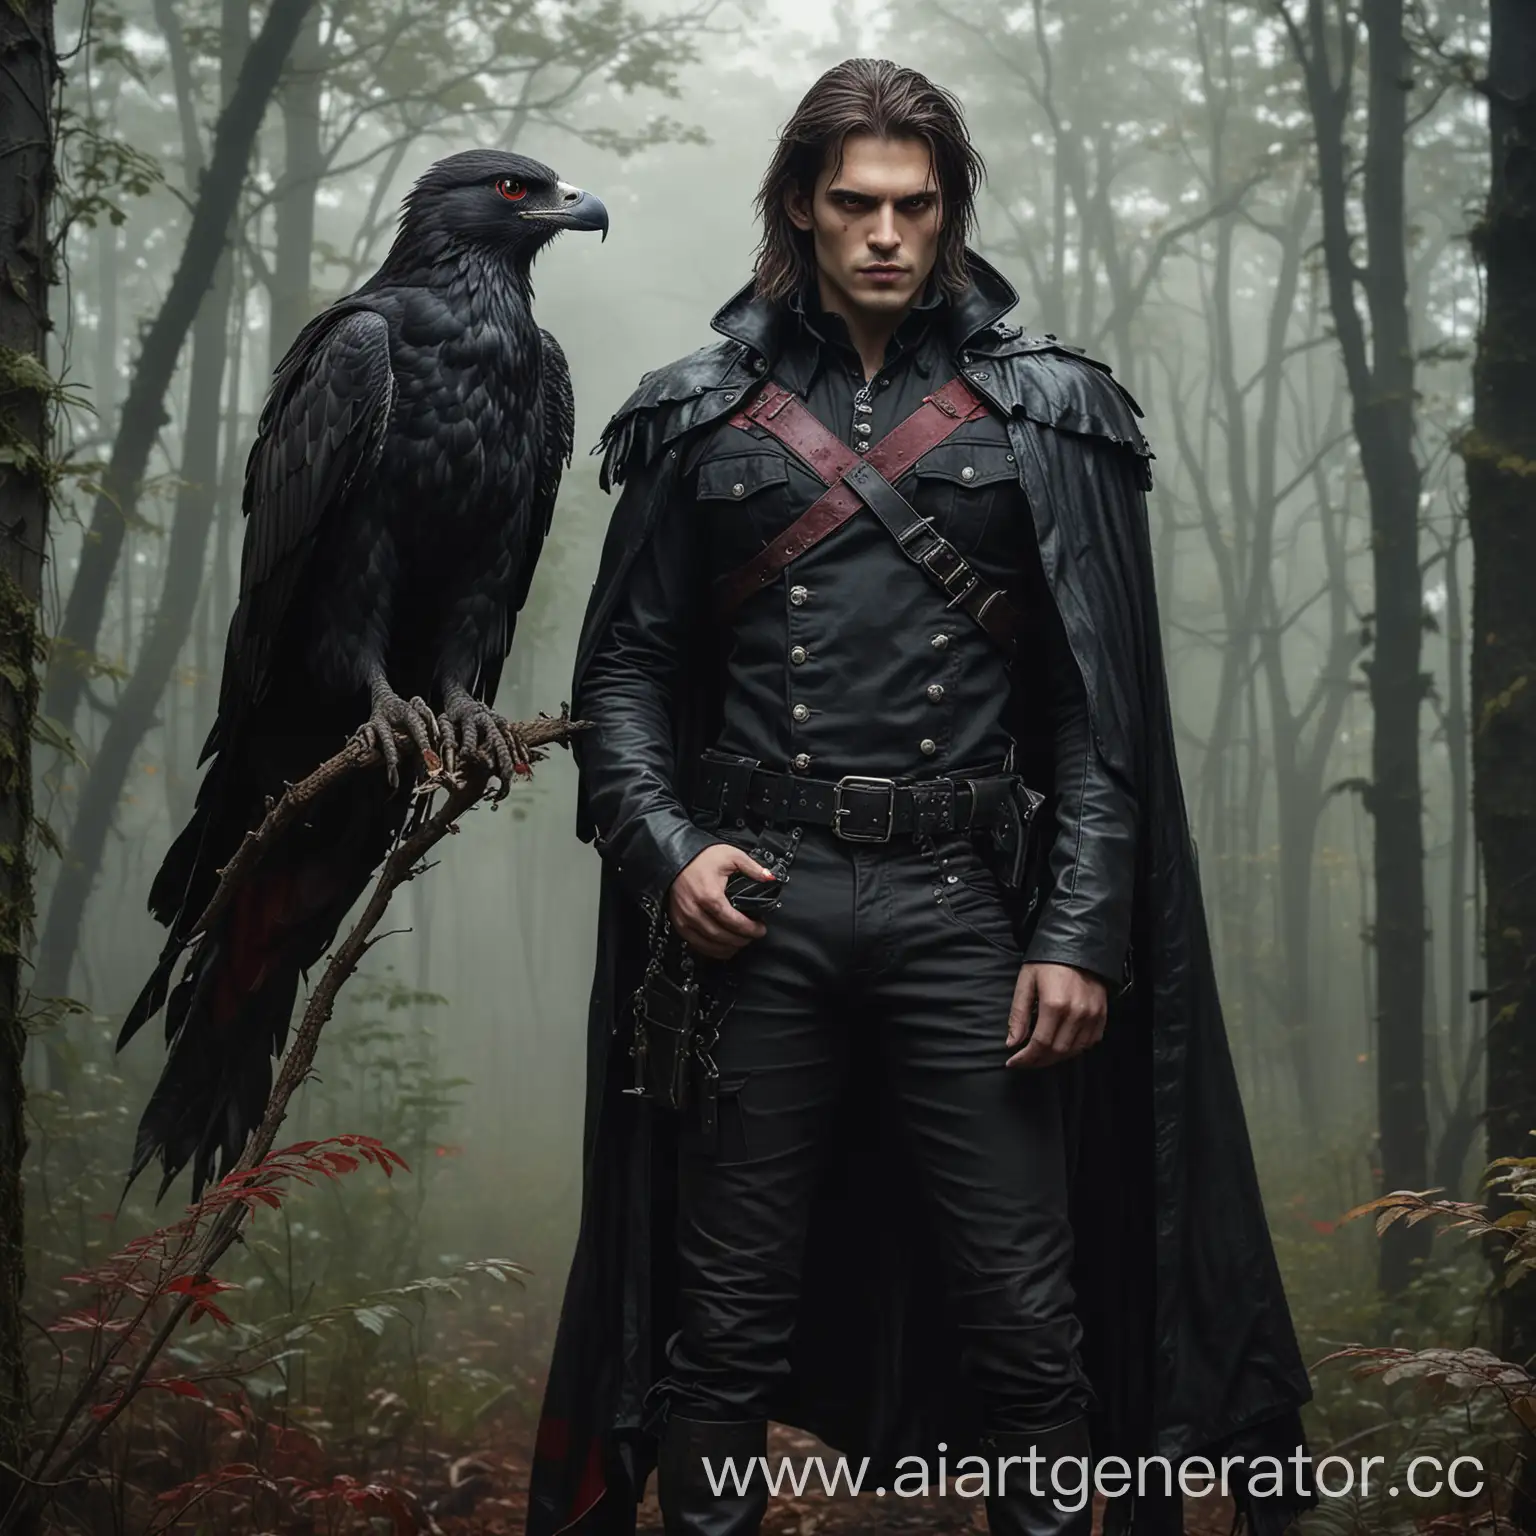 Mysterious-Vampire-Man-with-Falcon-in-Enchanted-Forest